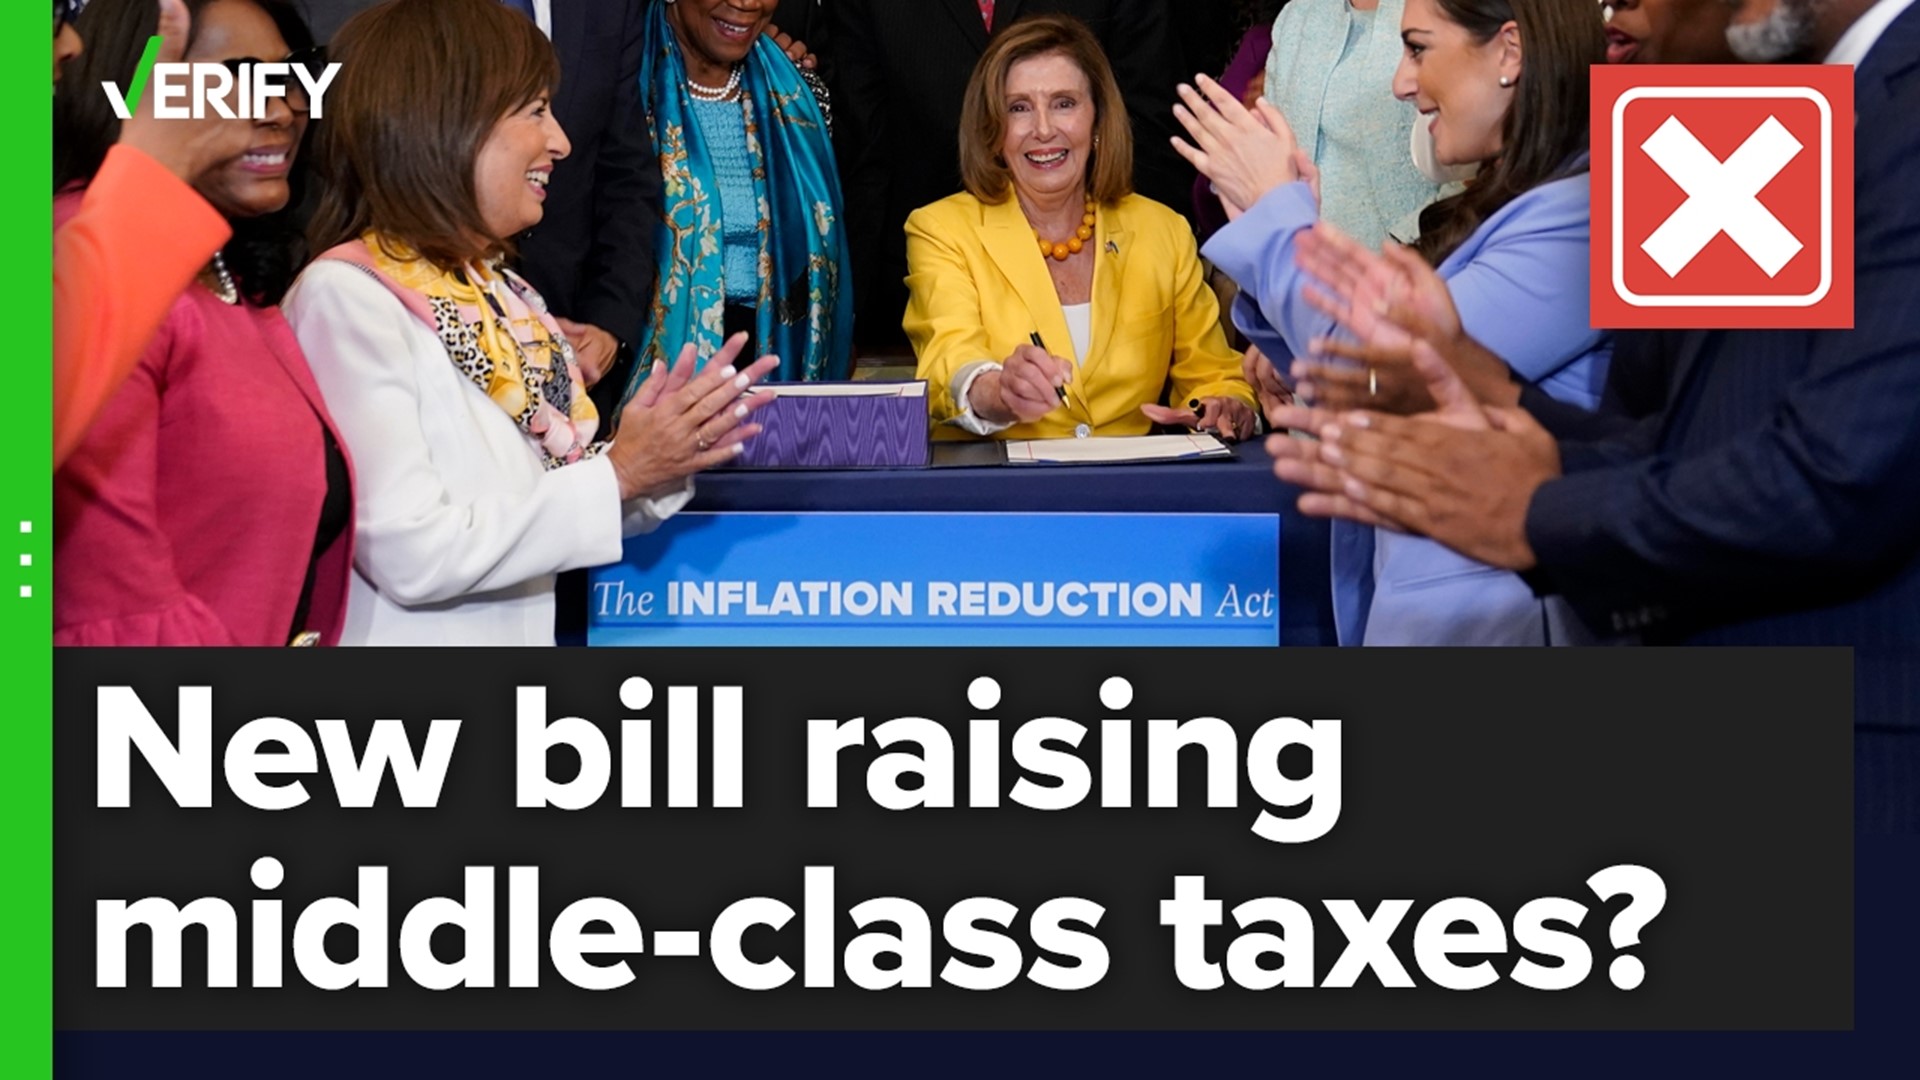 Does the Inflation Reduction Act raise taxes on the middle class? The VERIFY team confirms this is false.